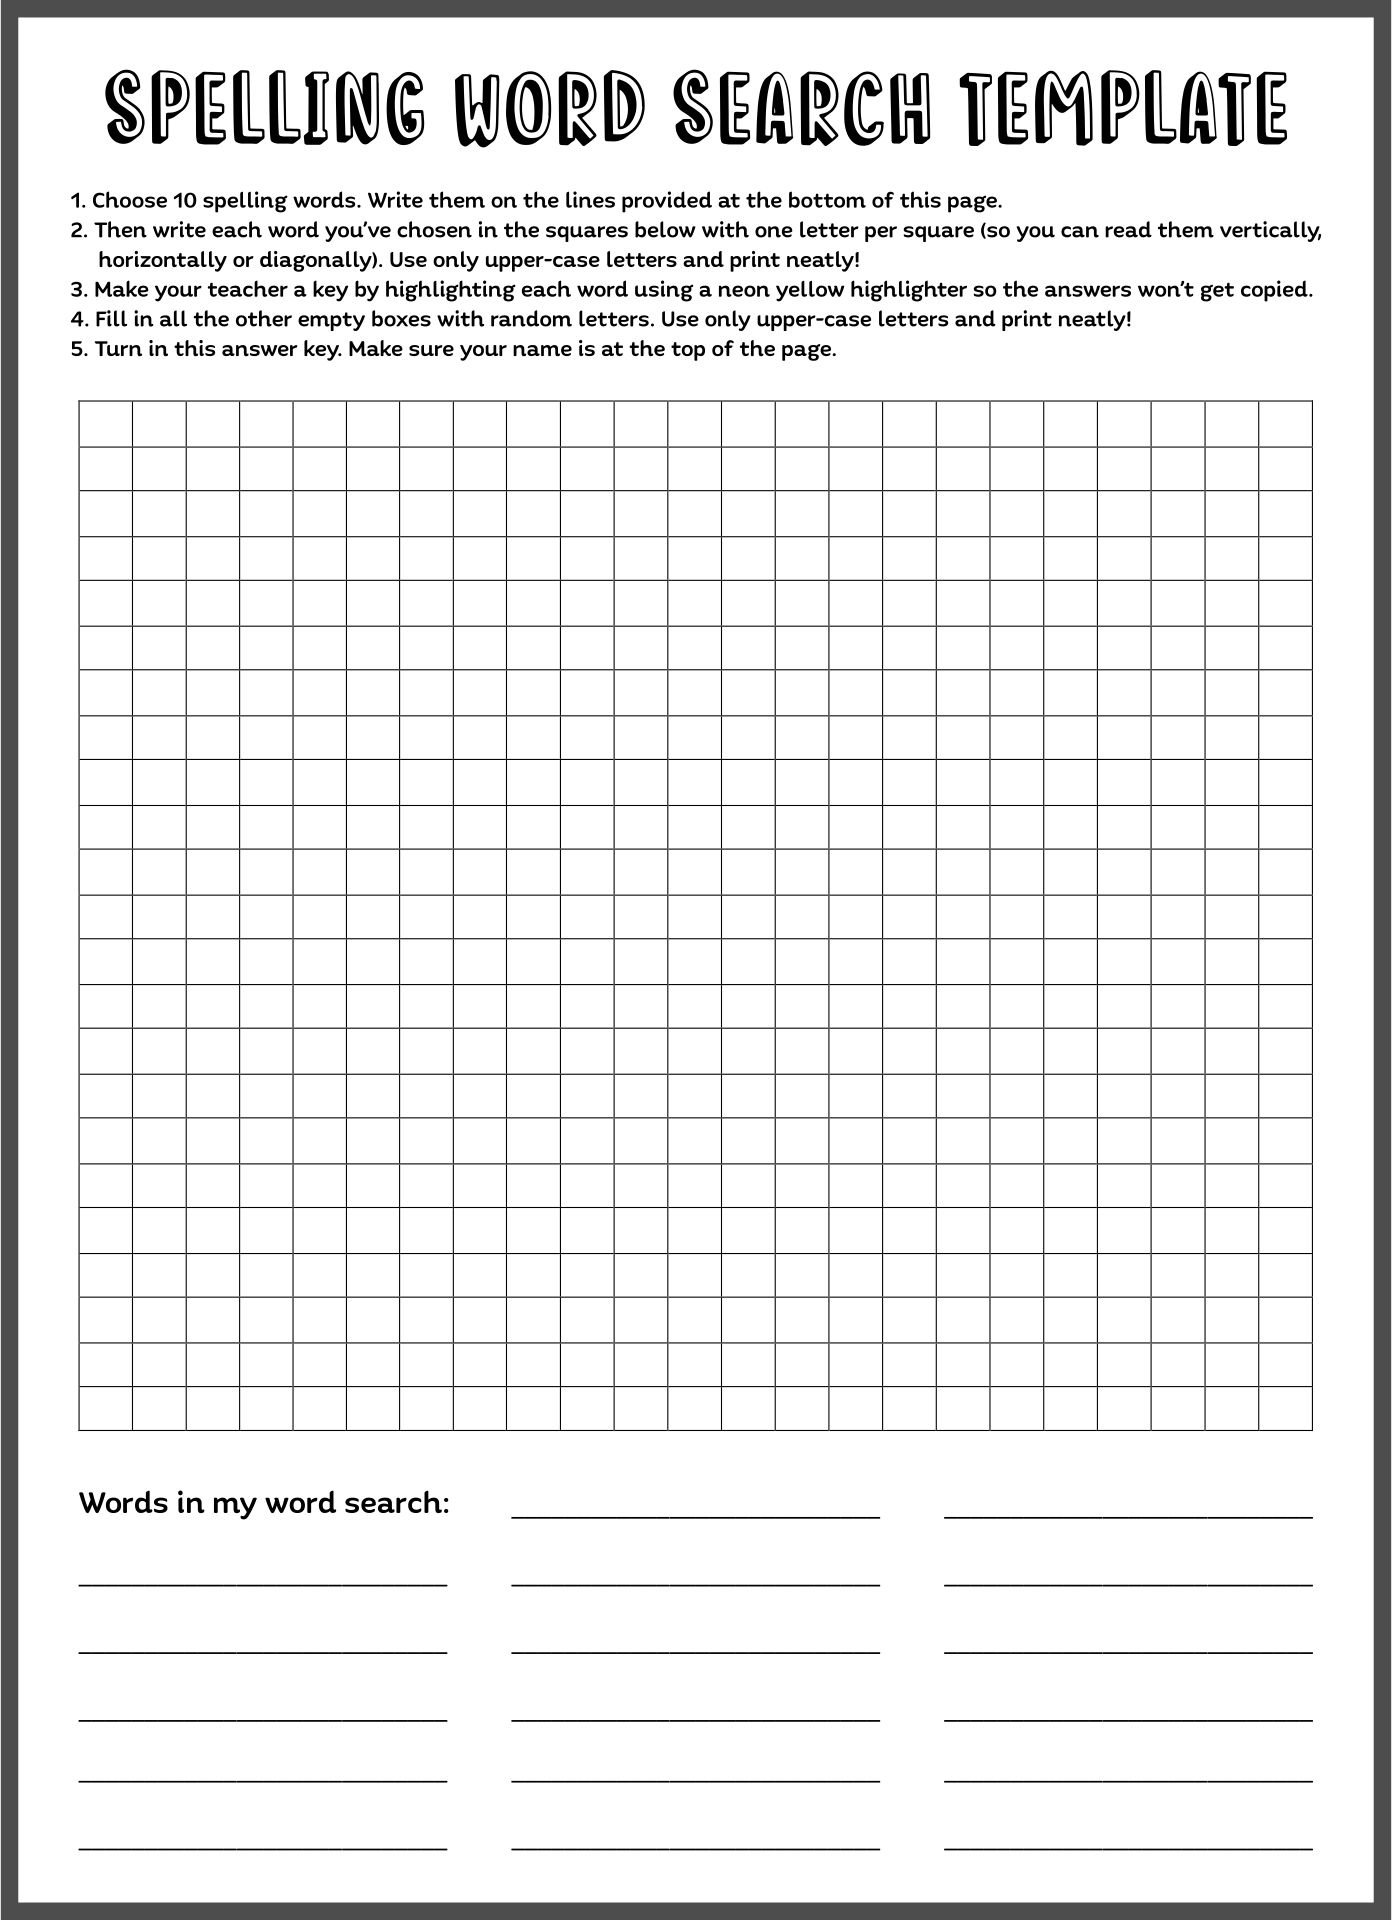 blank-word-search-worksheets-word-search-template-blank-puzzle-templates-for-kids-marshall-fiona